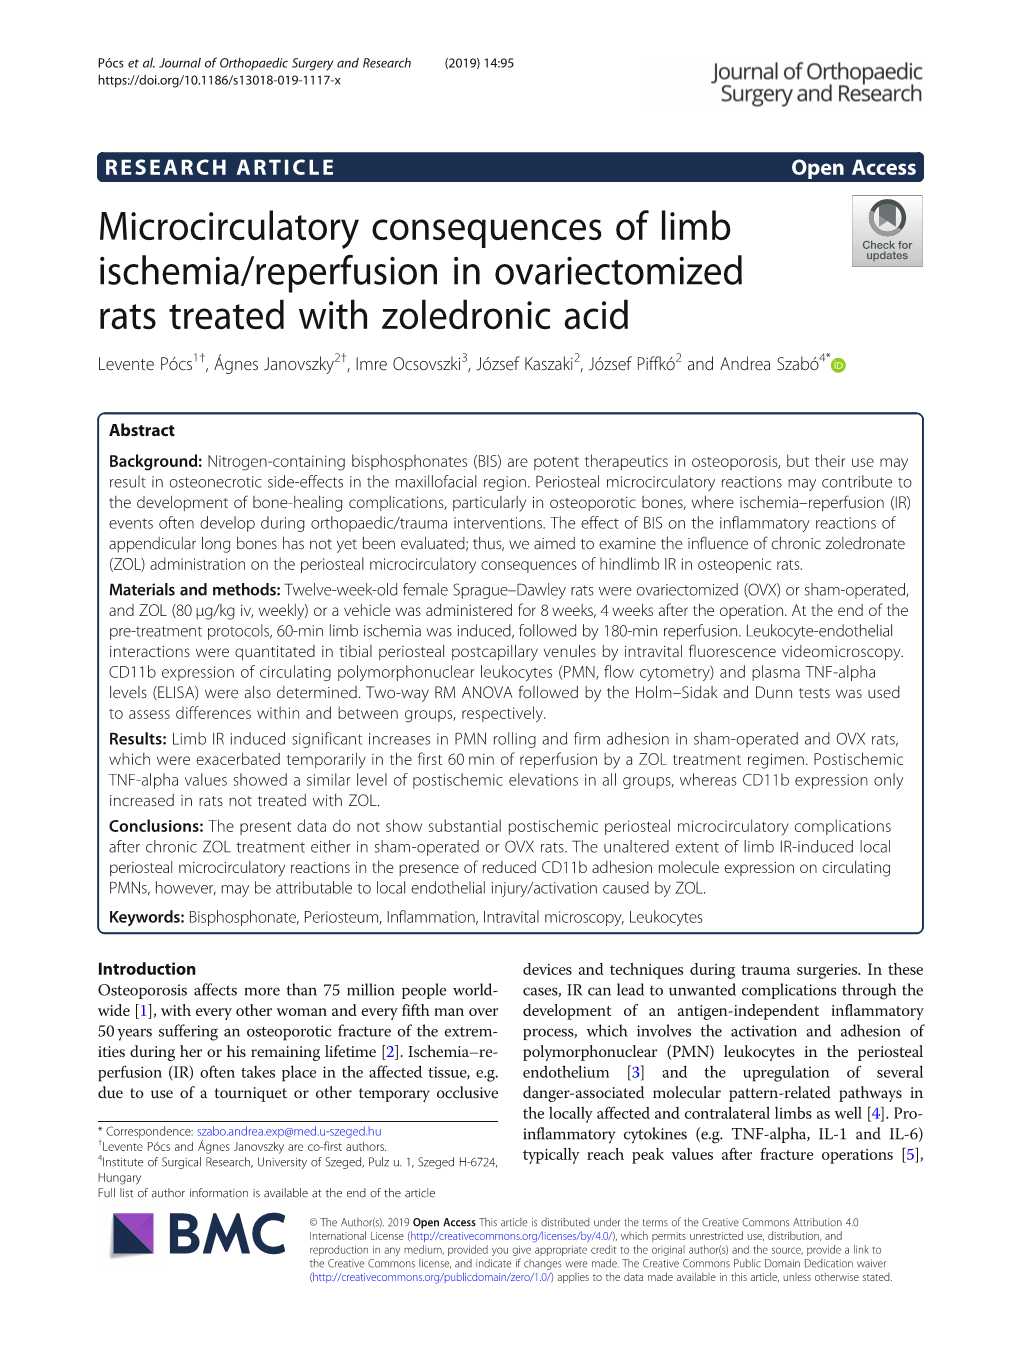 Microcirculatory Consequences of Limb Ischemia/Reperfusion In